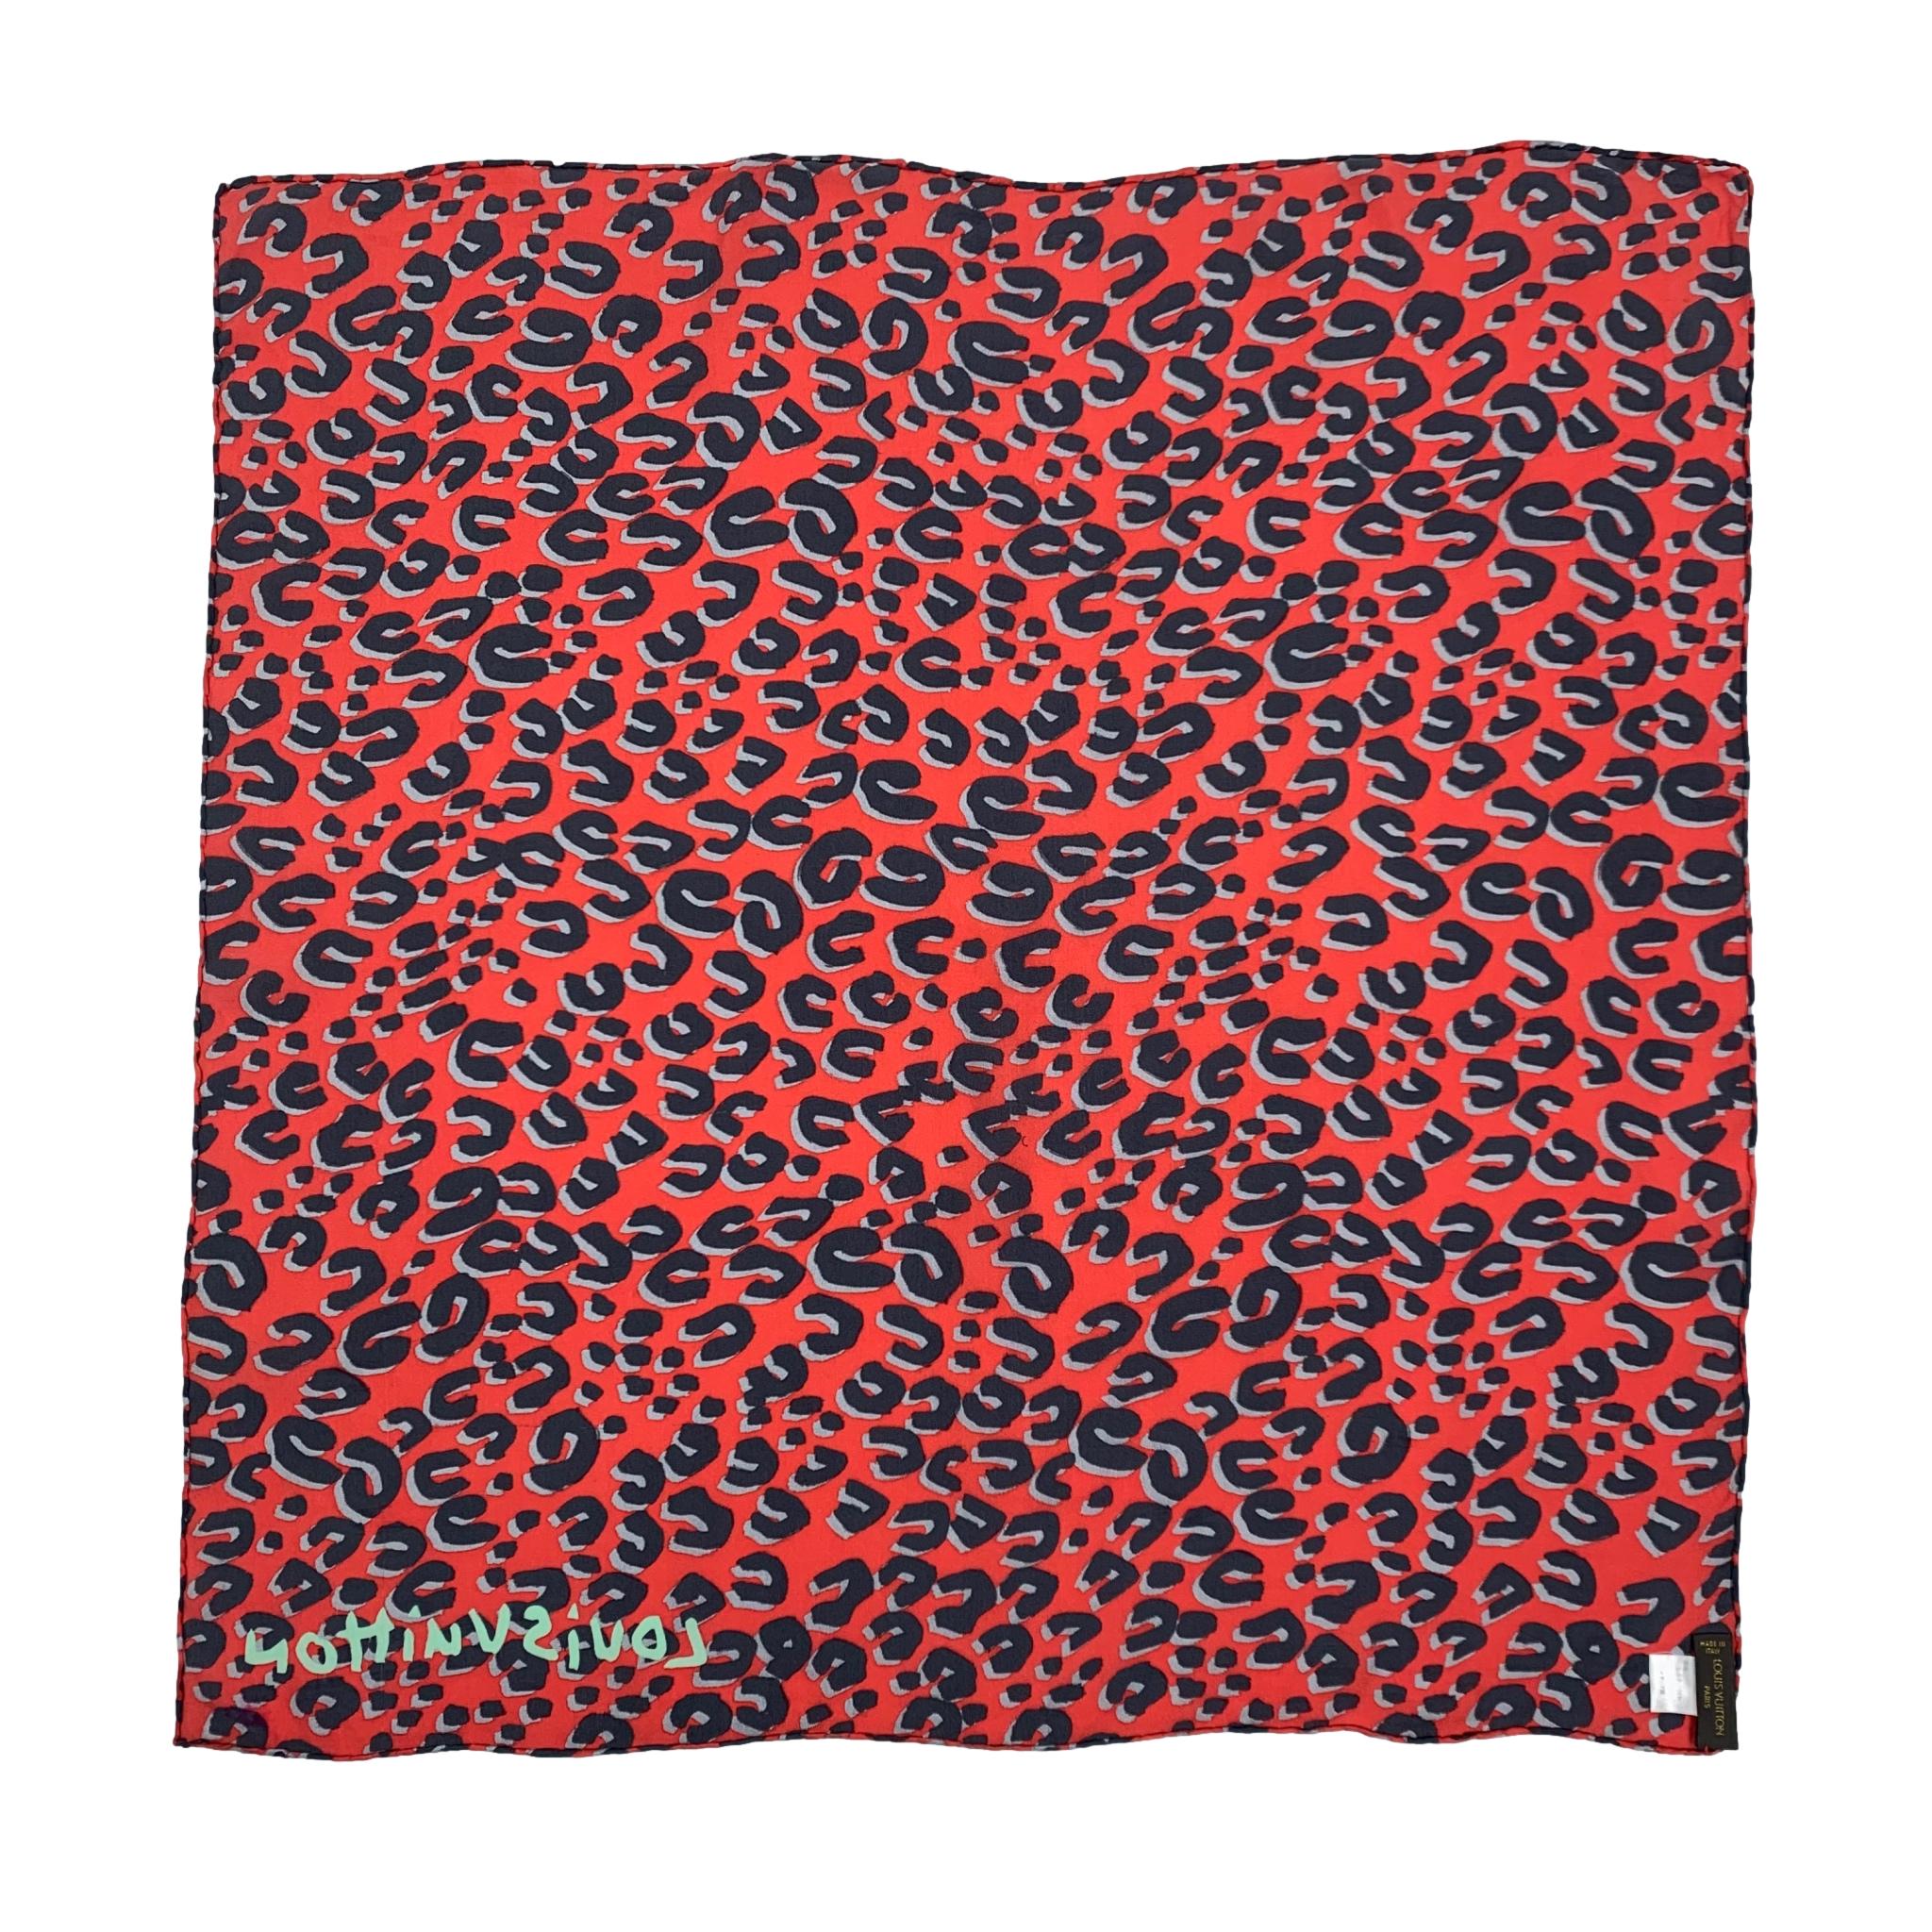 Louis Vuitton x Stephen Sprouse Graffiti scarf. - Planet of the